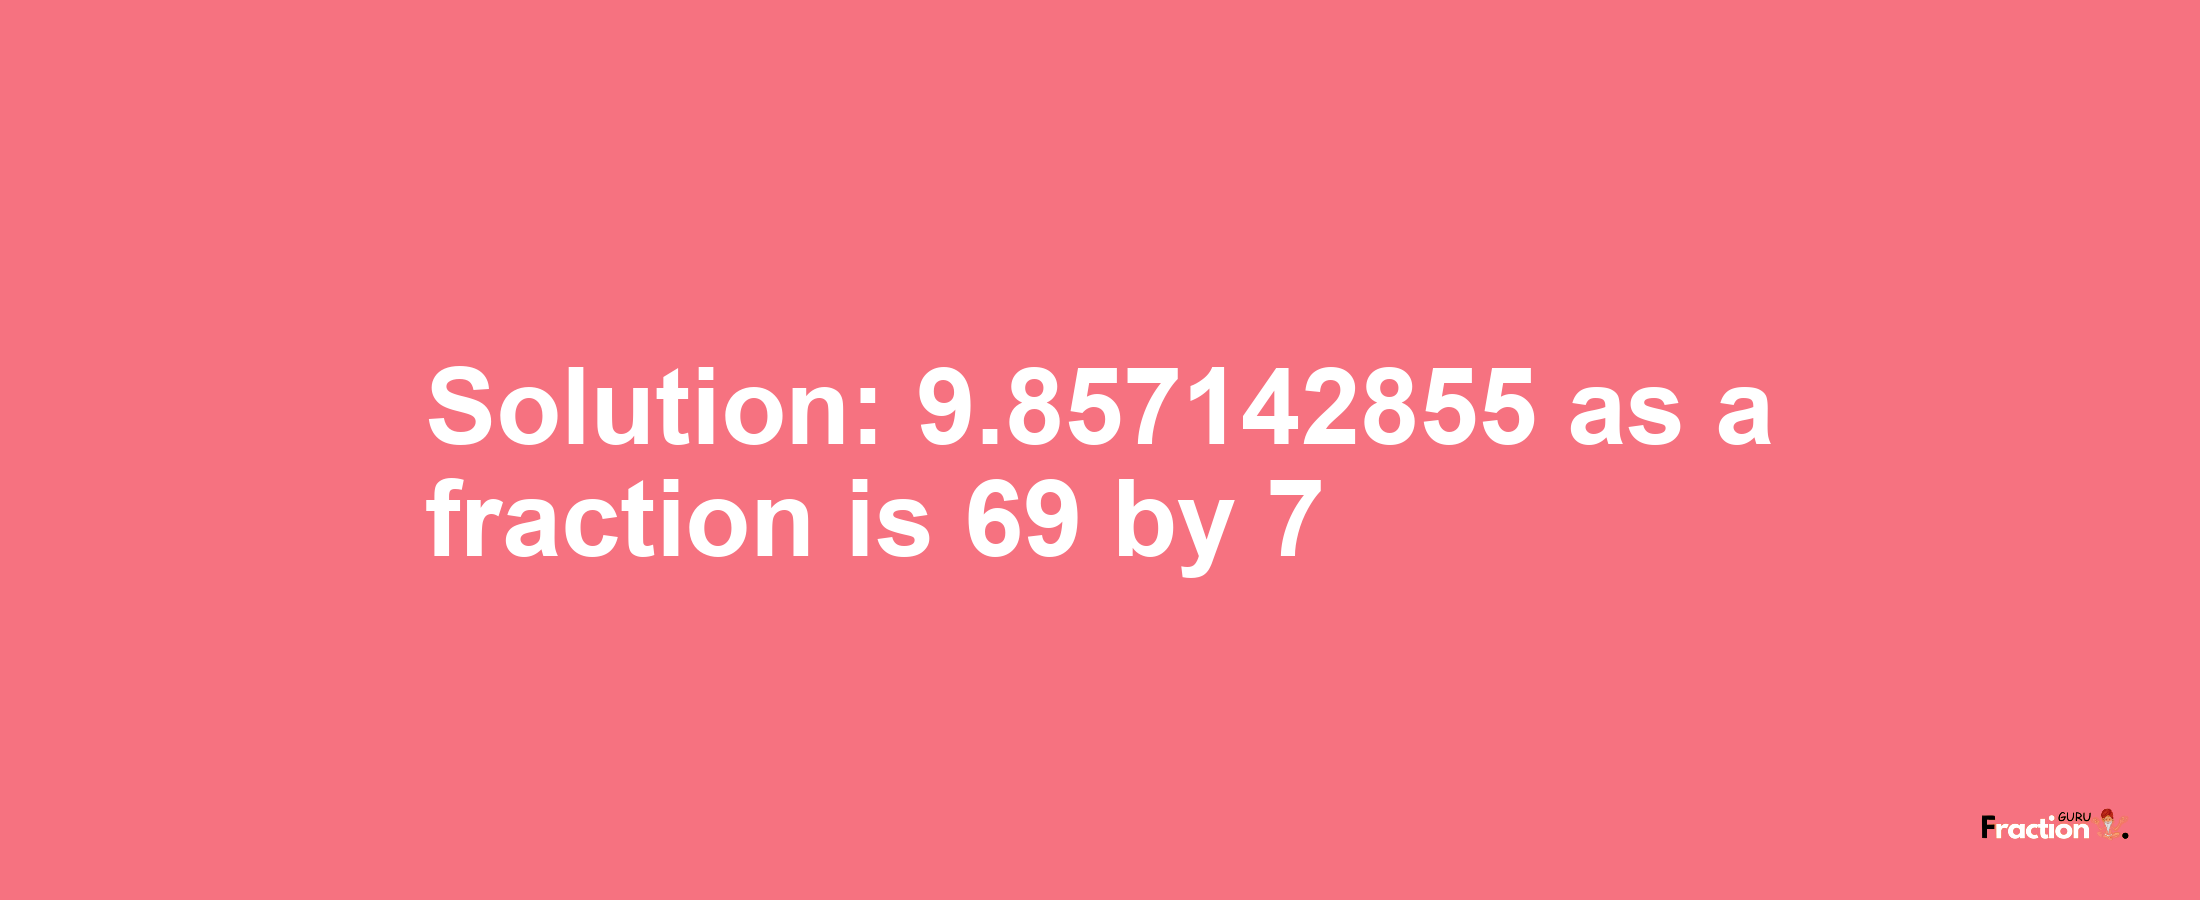 Solution:9.857142855 as a fraction is 69/7